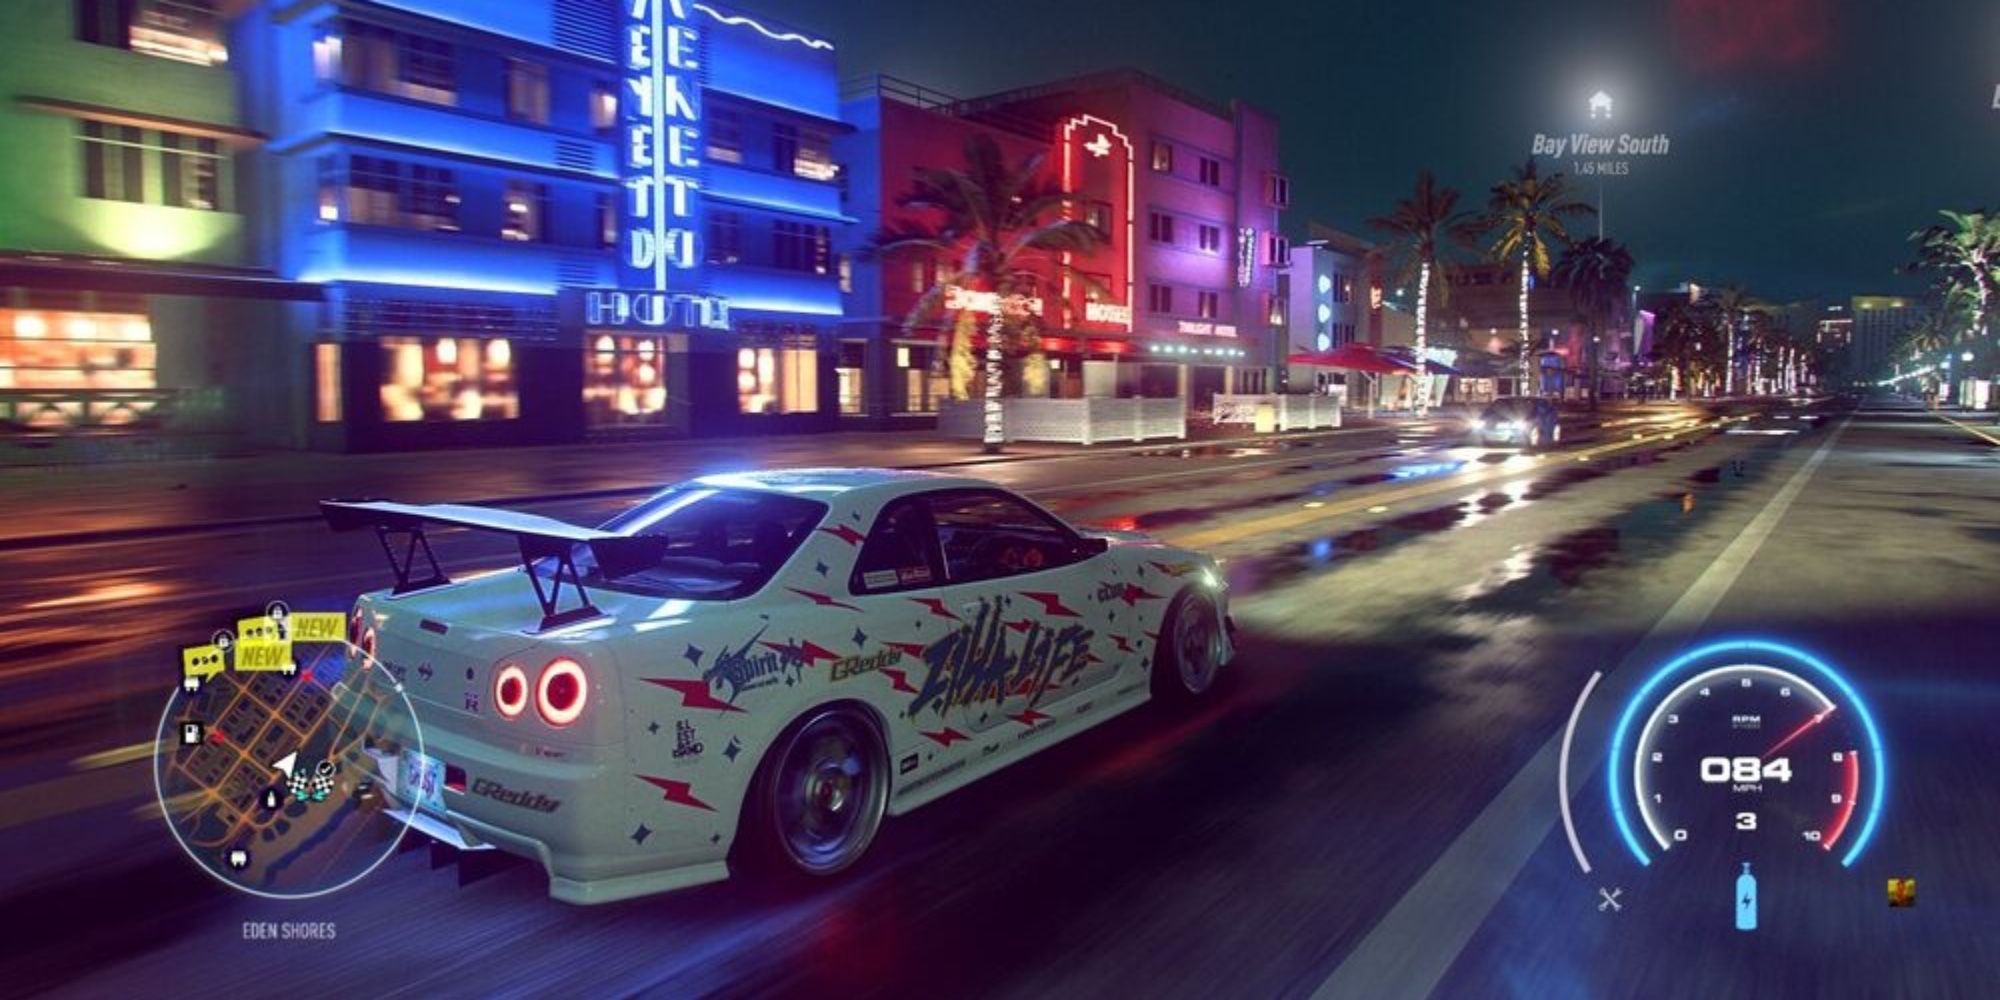 Most Realistic Racing Games - Need for Speed - Heat - Player explores the city at night